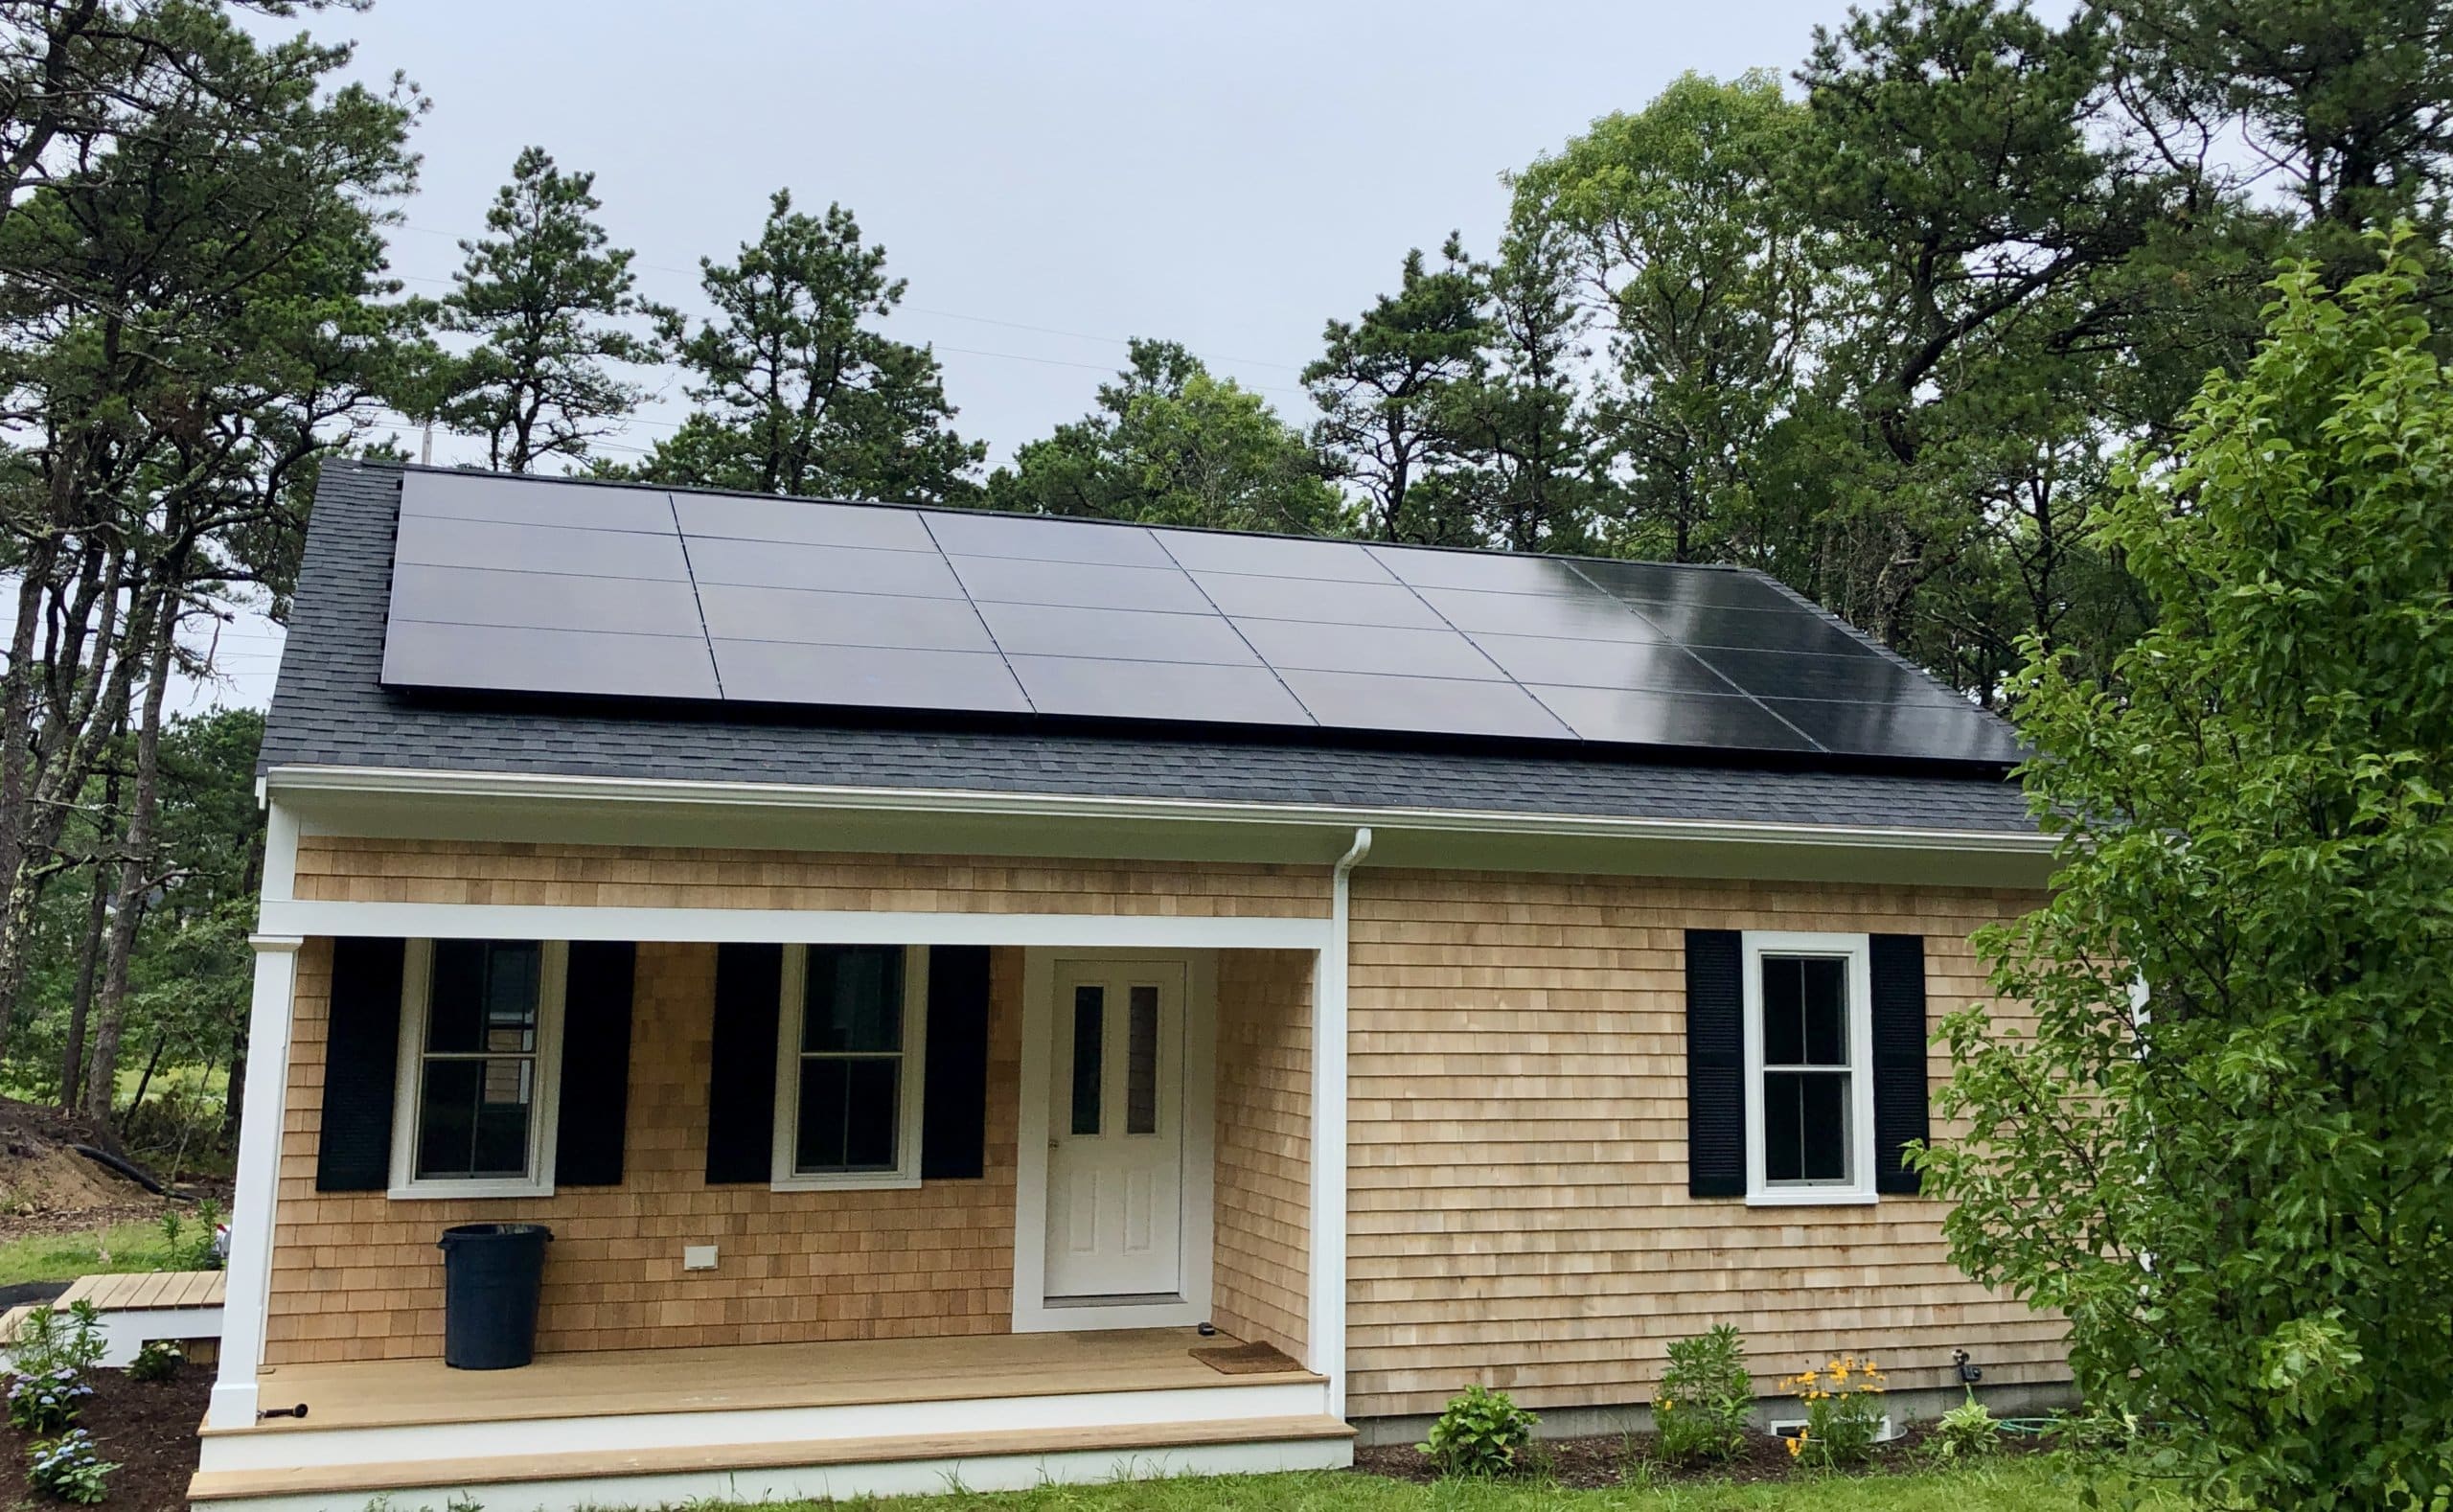 solar for cape cod affordable housing: My Generation Energy + Habitat for Humanity